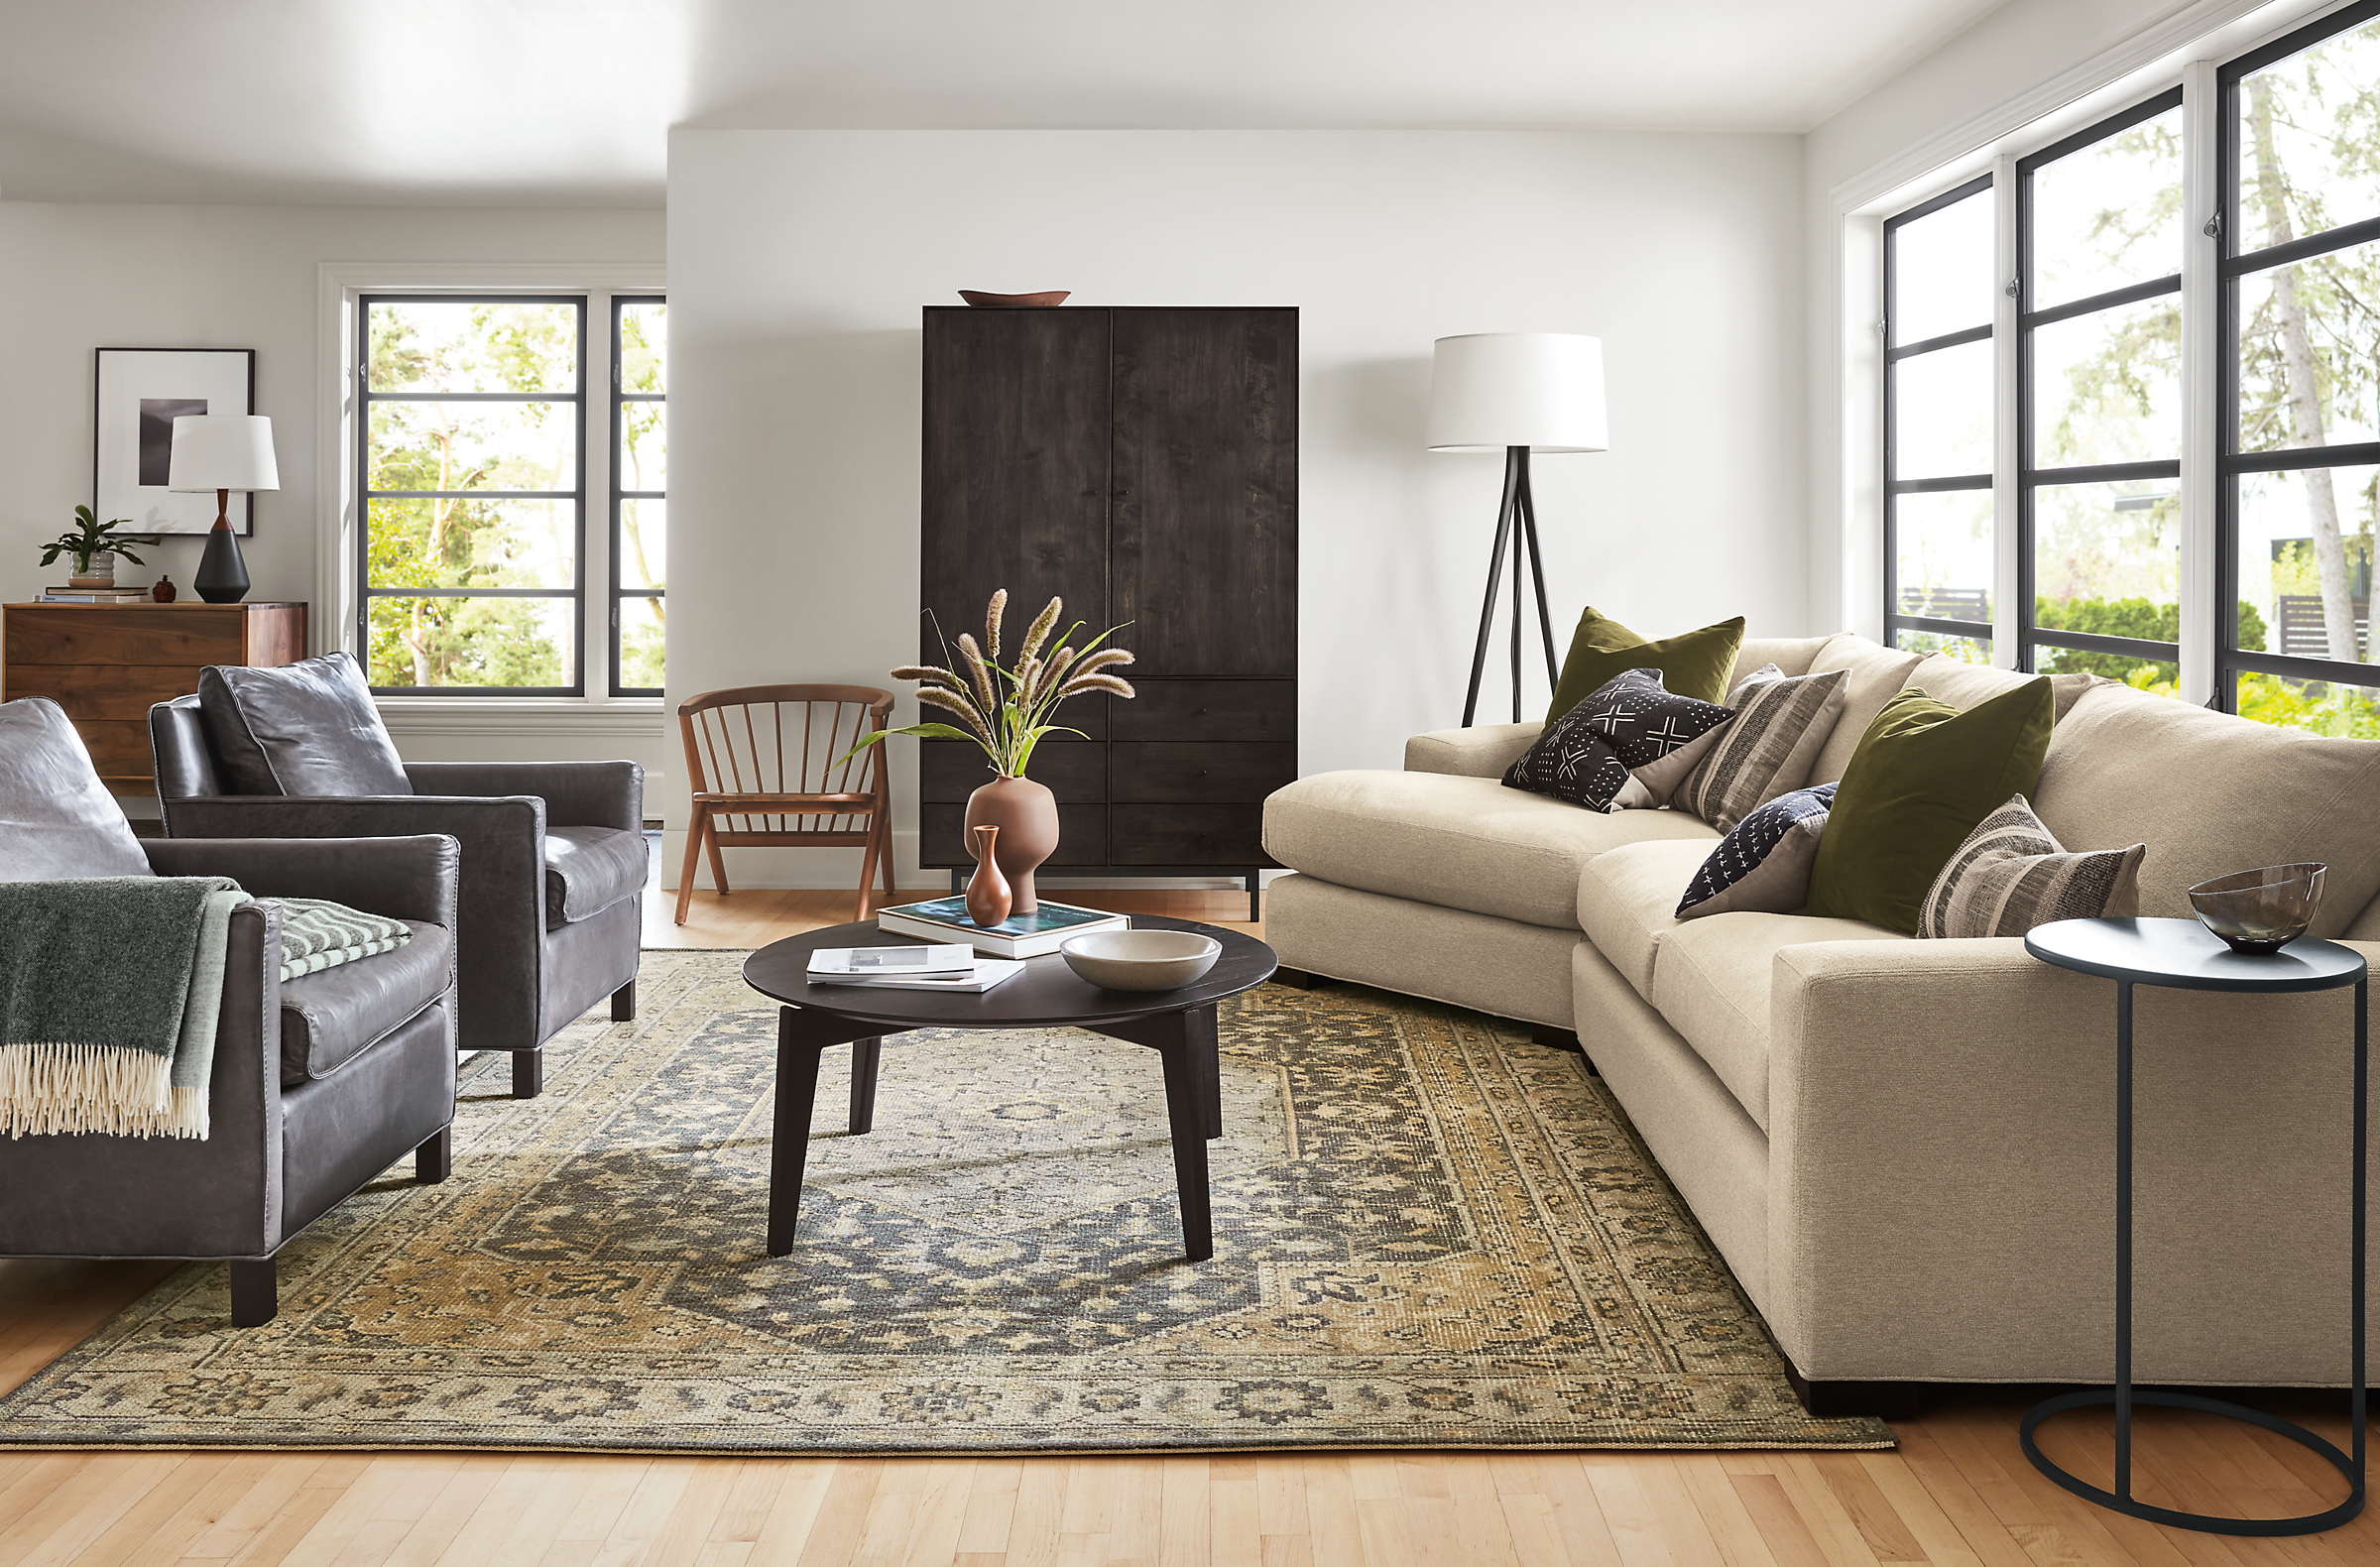 living room with angled metro sofa in tatum fabric, bram leather chairs, orlin coffee table, veda rug.